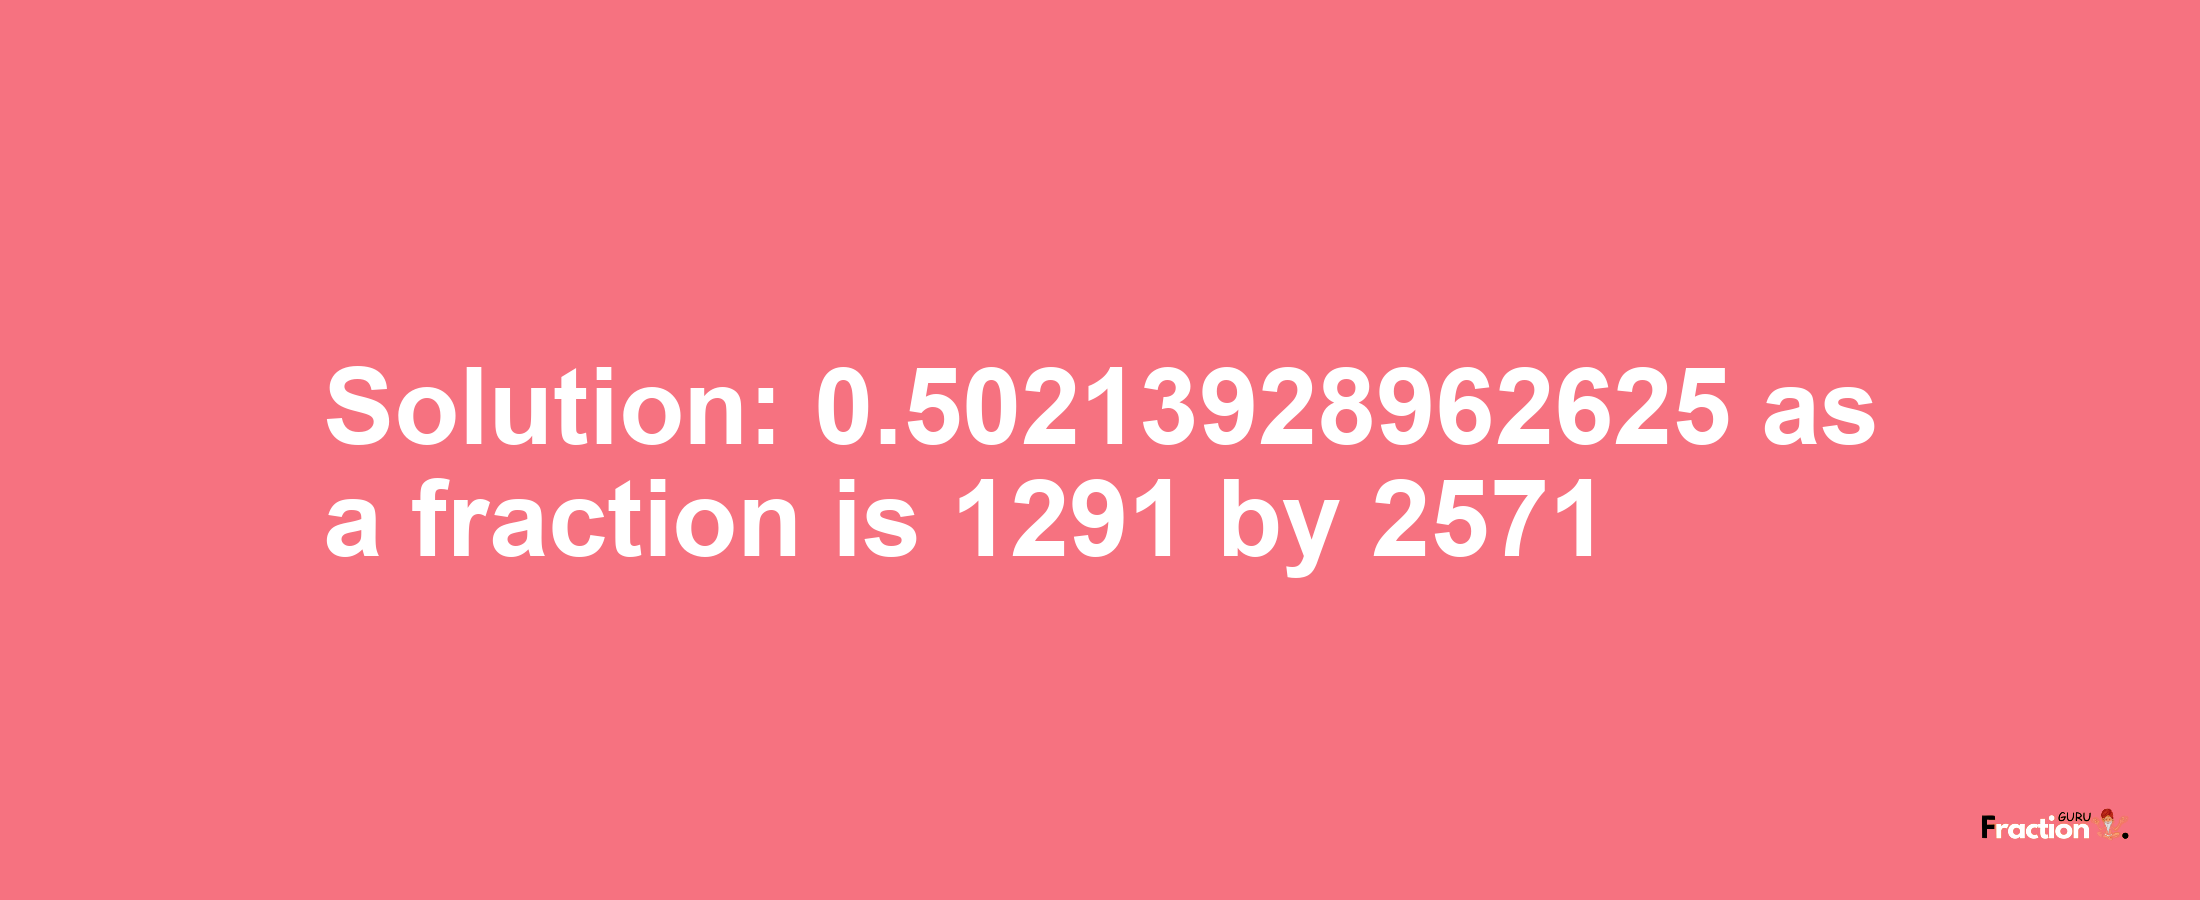 Solution:0.50213928962625 as a fraction is 1291/2571